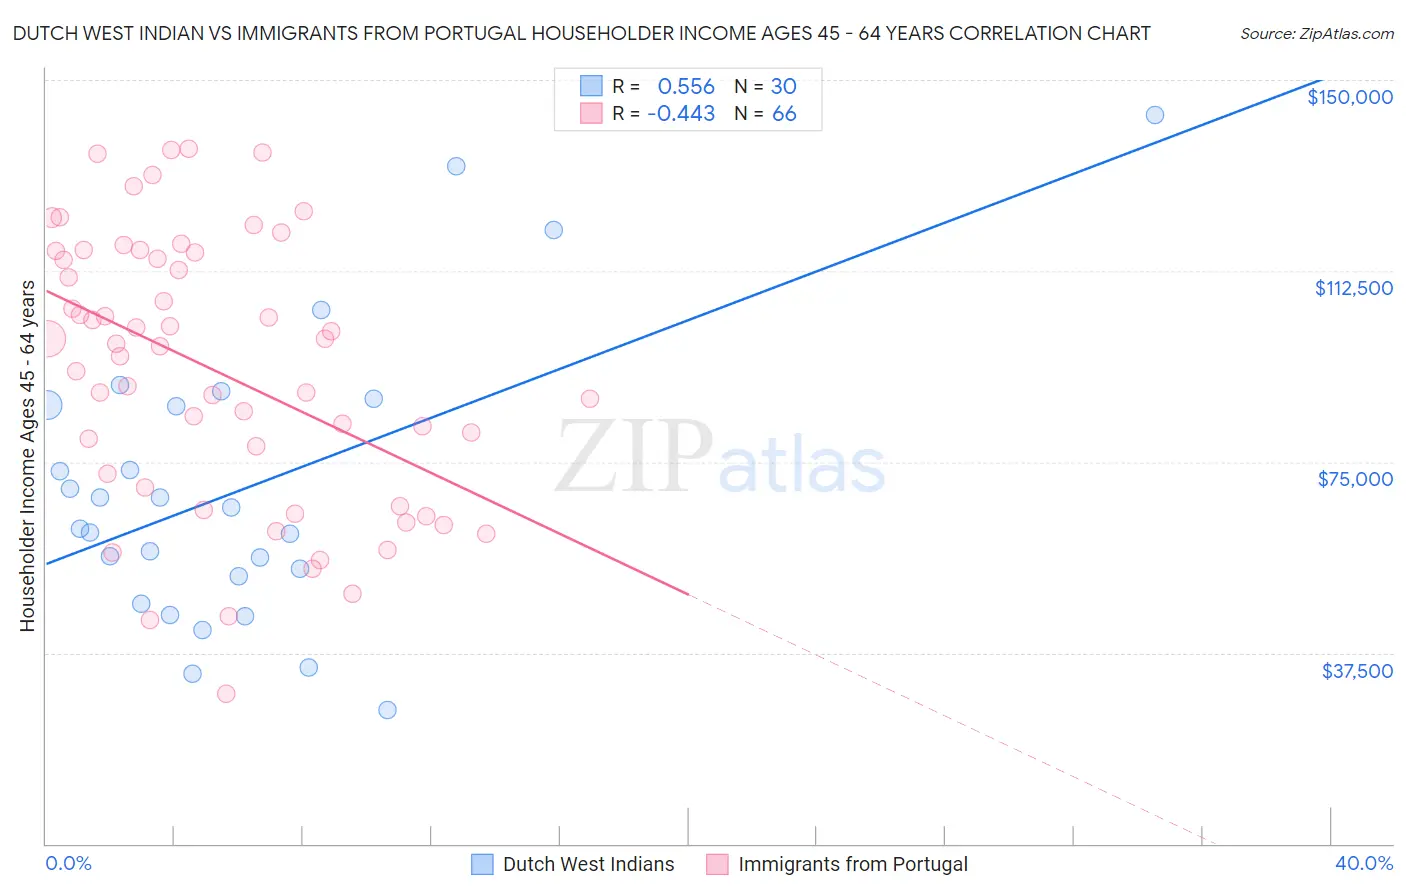 Dutch West Indian vs Immigrants from Portugal Householder Income Ages 45 - 64 years